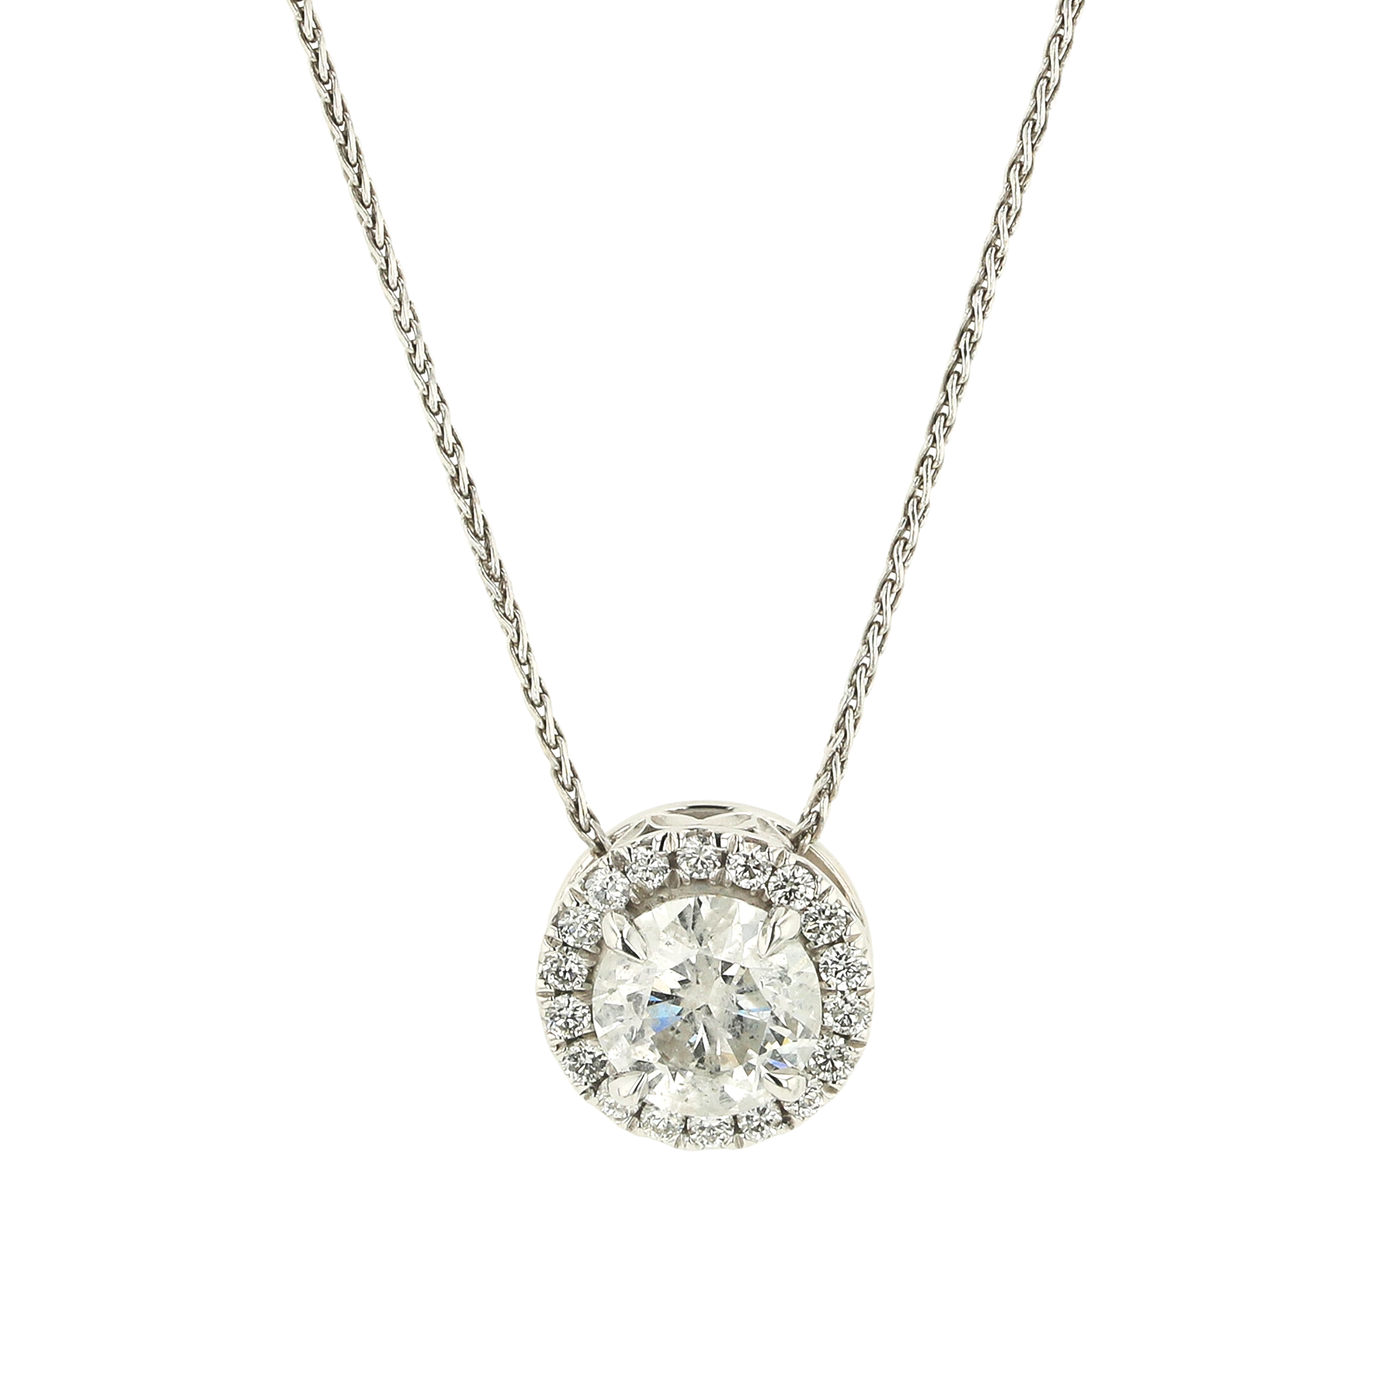 "Luminary Halo" 1.65 CTTW Halo Pendant in 18K White Gold